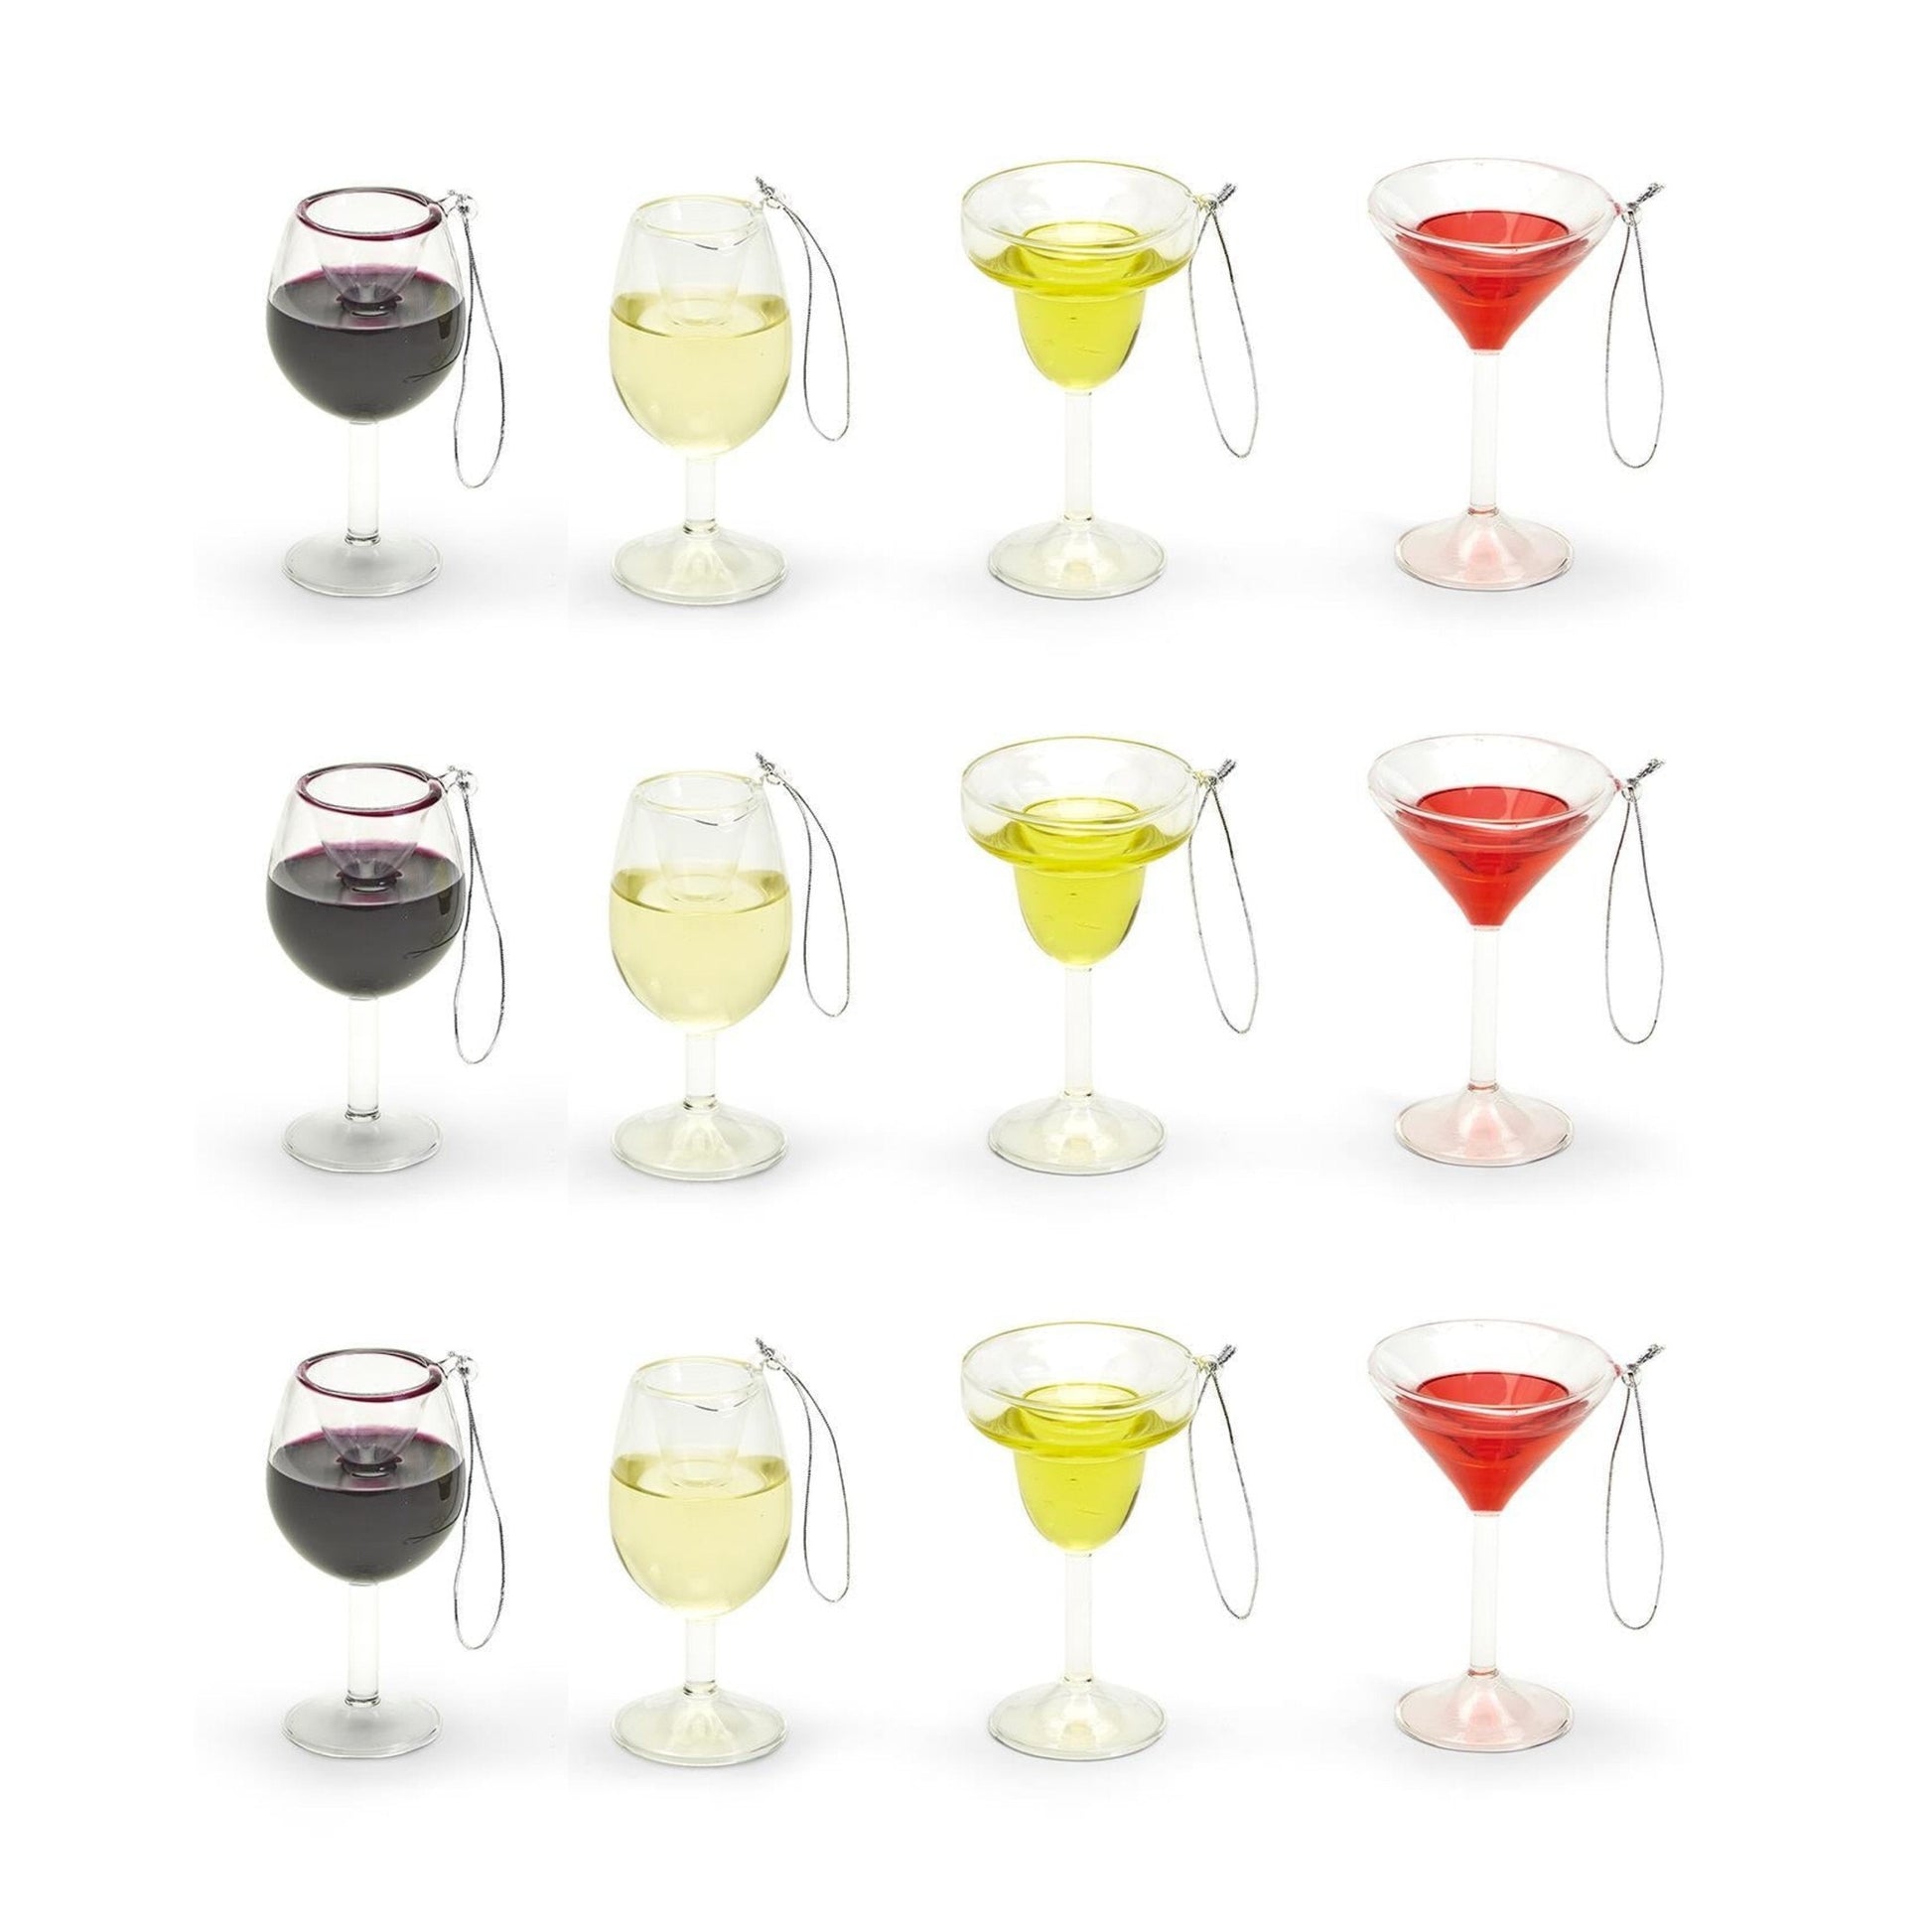 Set of 12 Happy Hour Hand-Crafted Glass Ornament | Real Liquid Inside | Wine, Martini, or Margarita